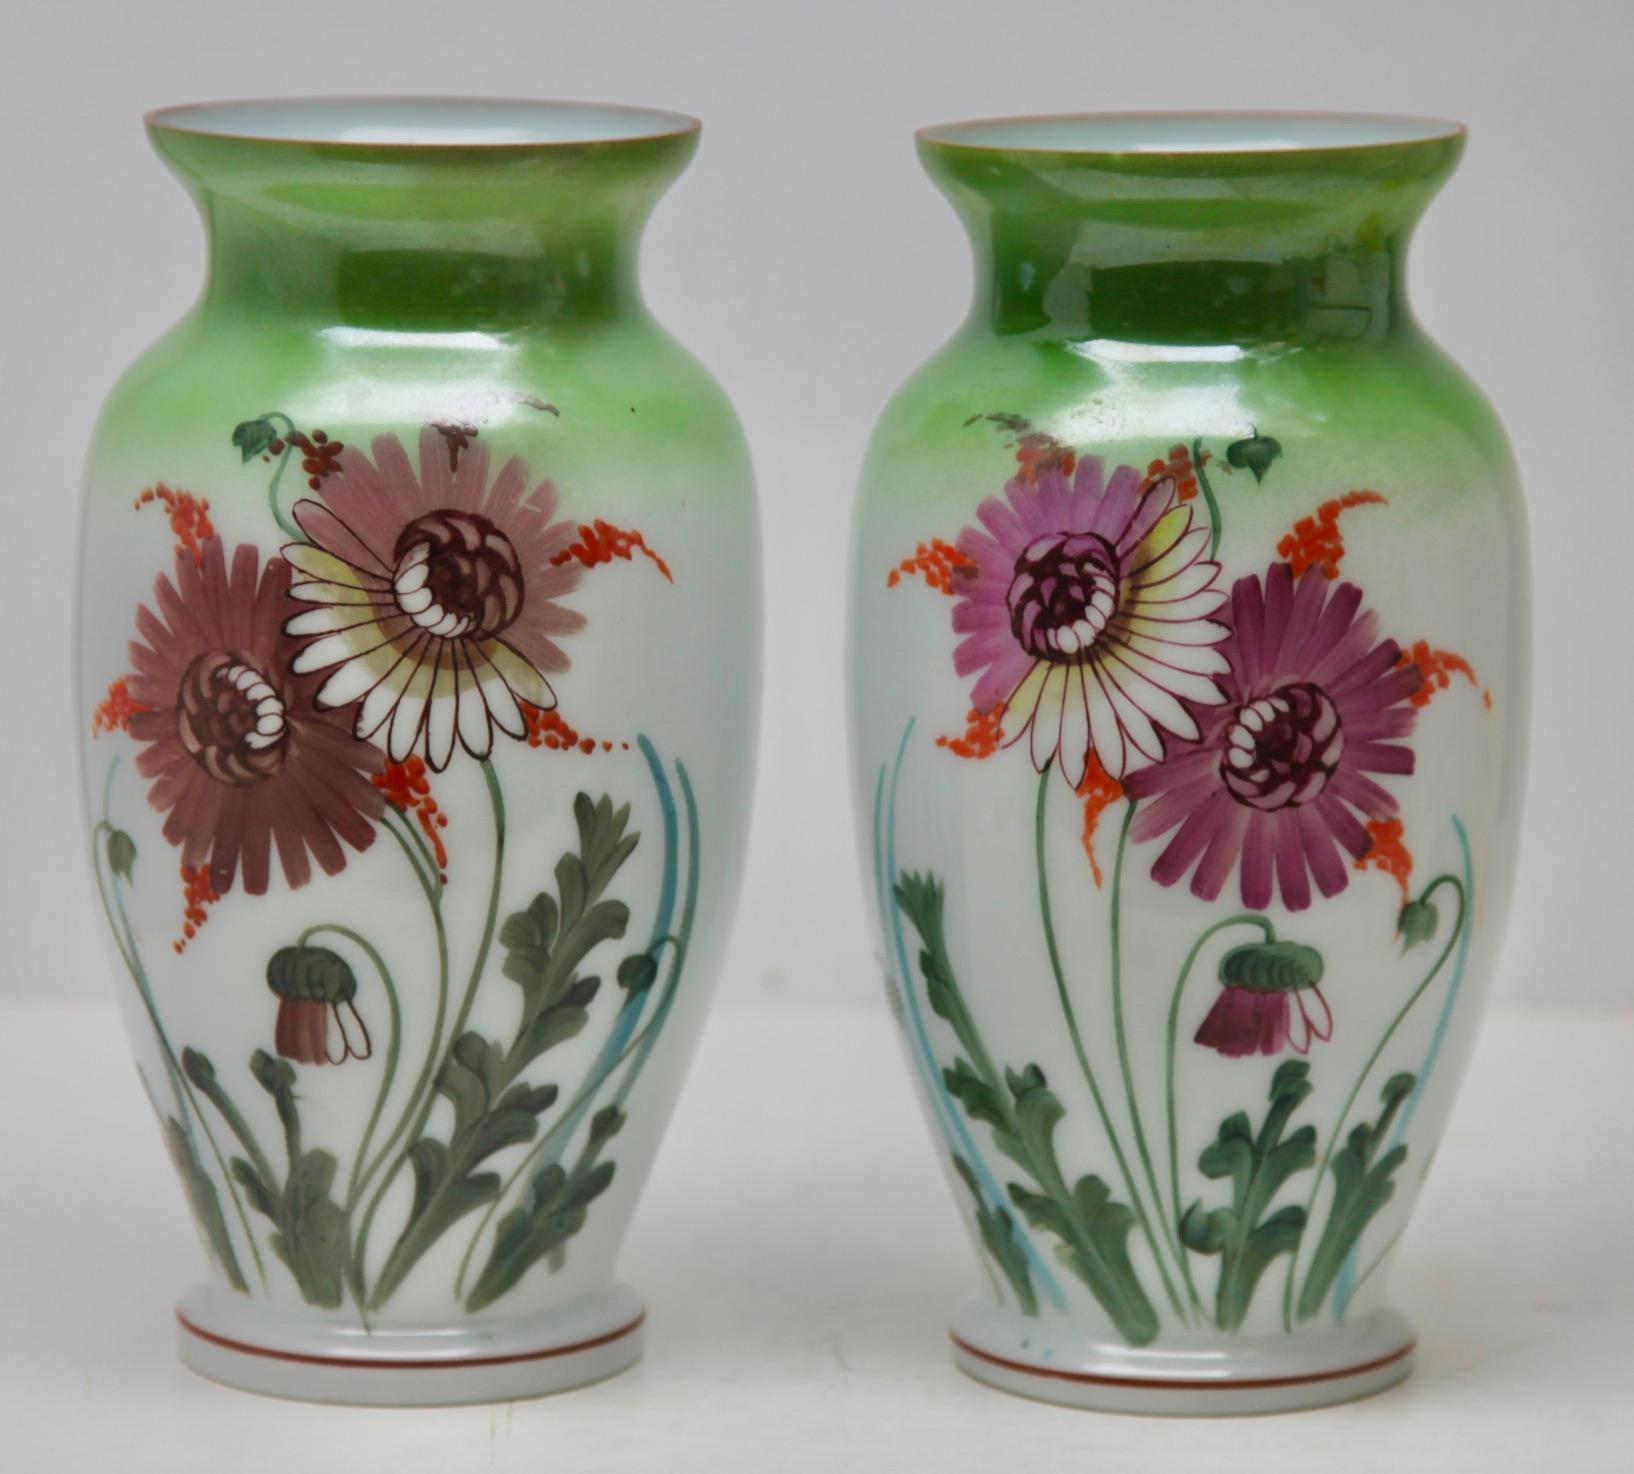 Art nouveau Pair handmade and Hand painted opaline vase, France 1920s
Handmade and hand-glazed in brilliant coloured with a spray of chrysanthemum blooms
Made in France
Art Nouveau period 1920 fine quality.

The pieces are in excellent